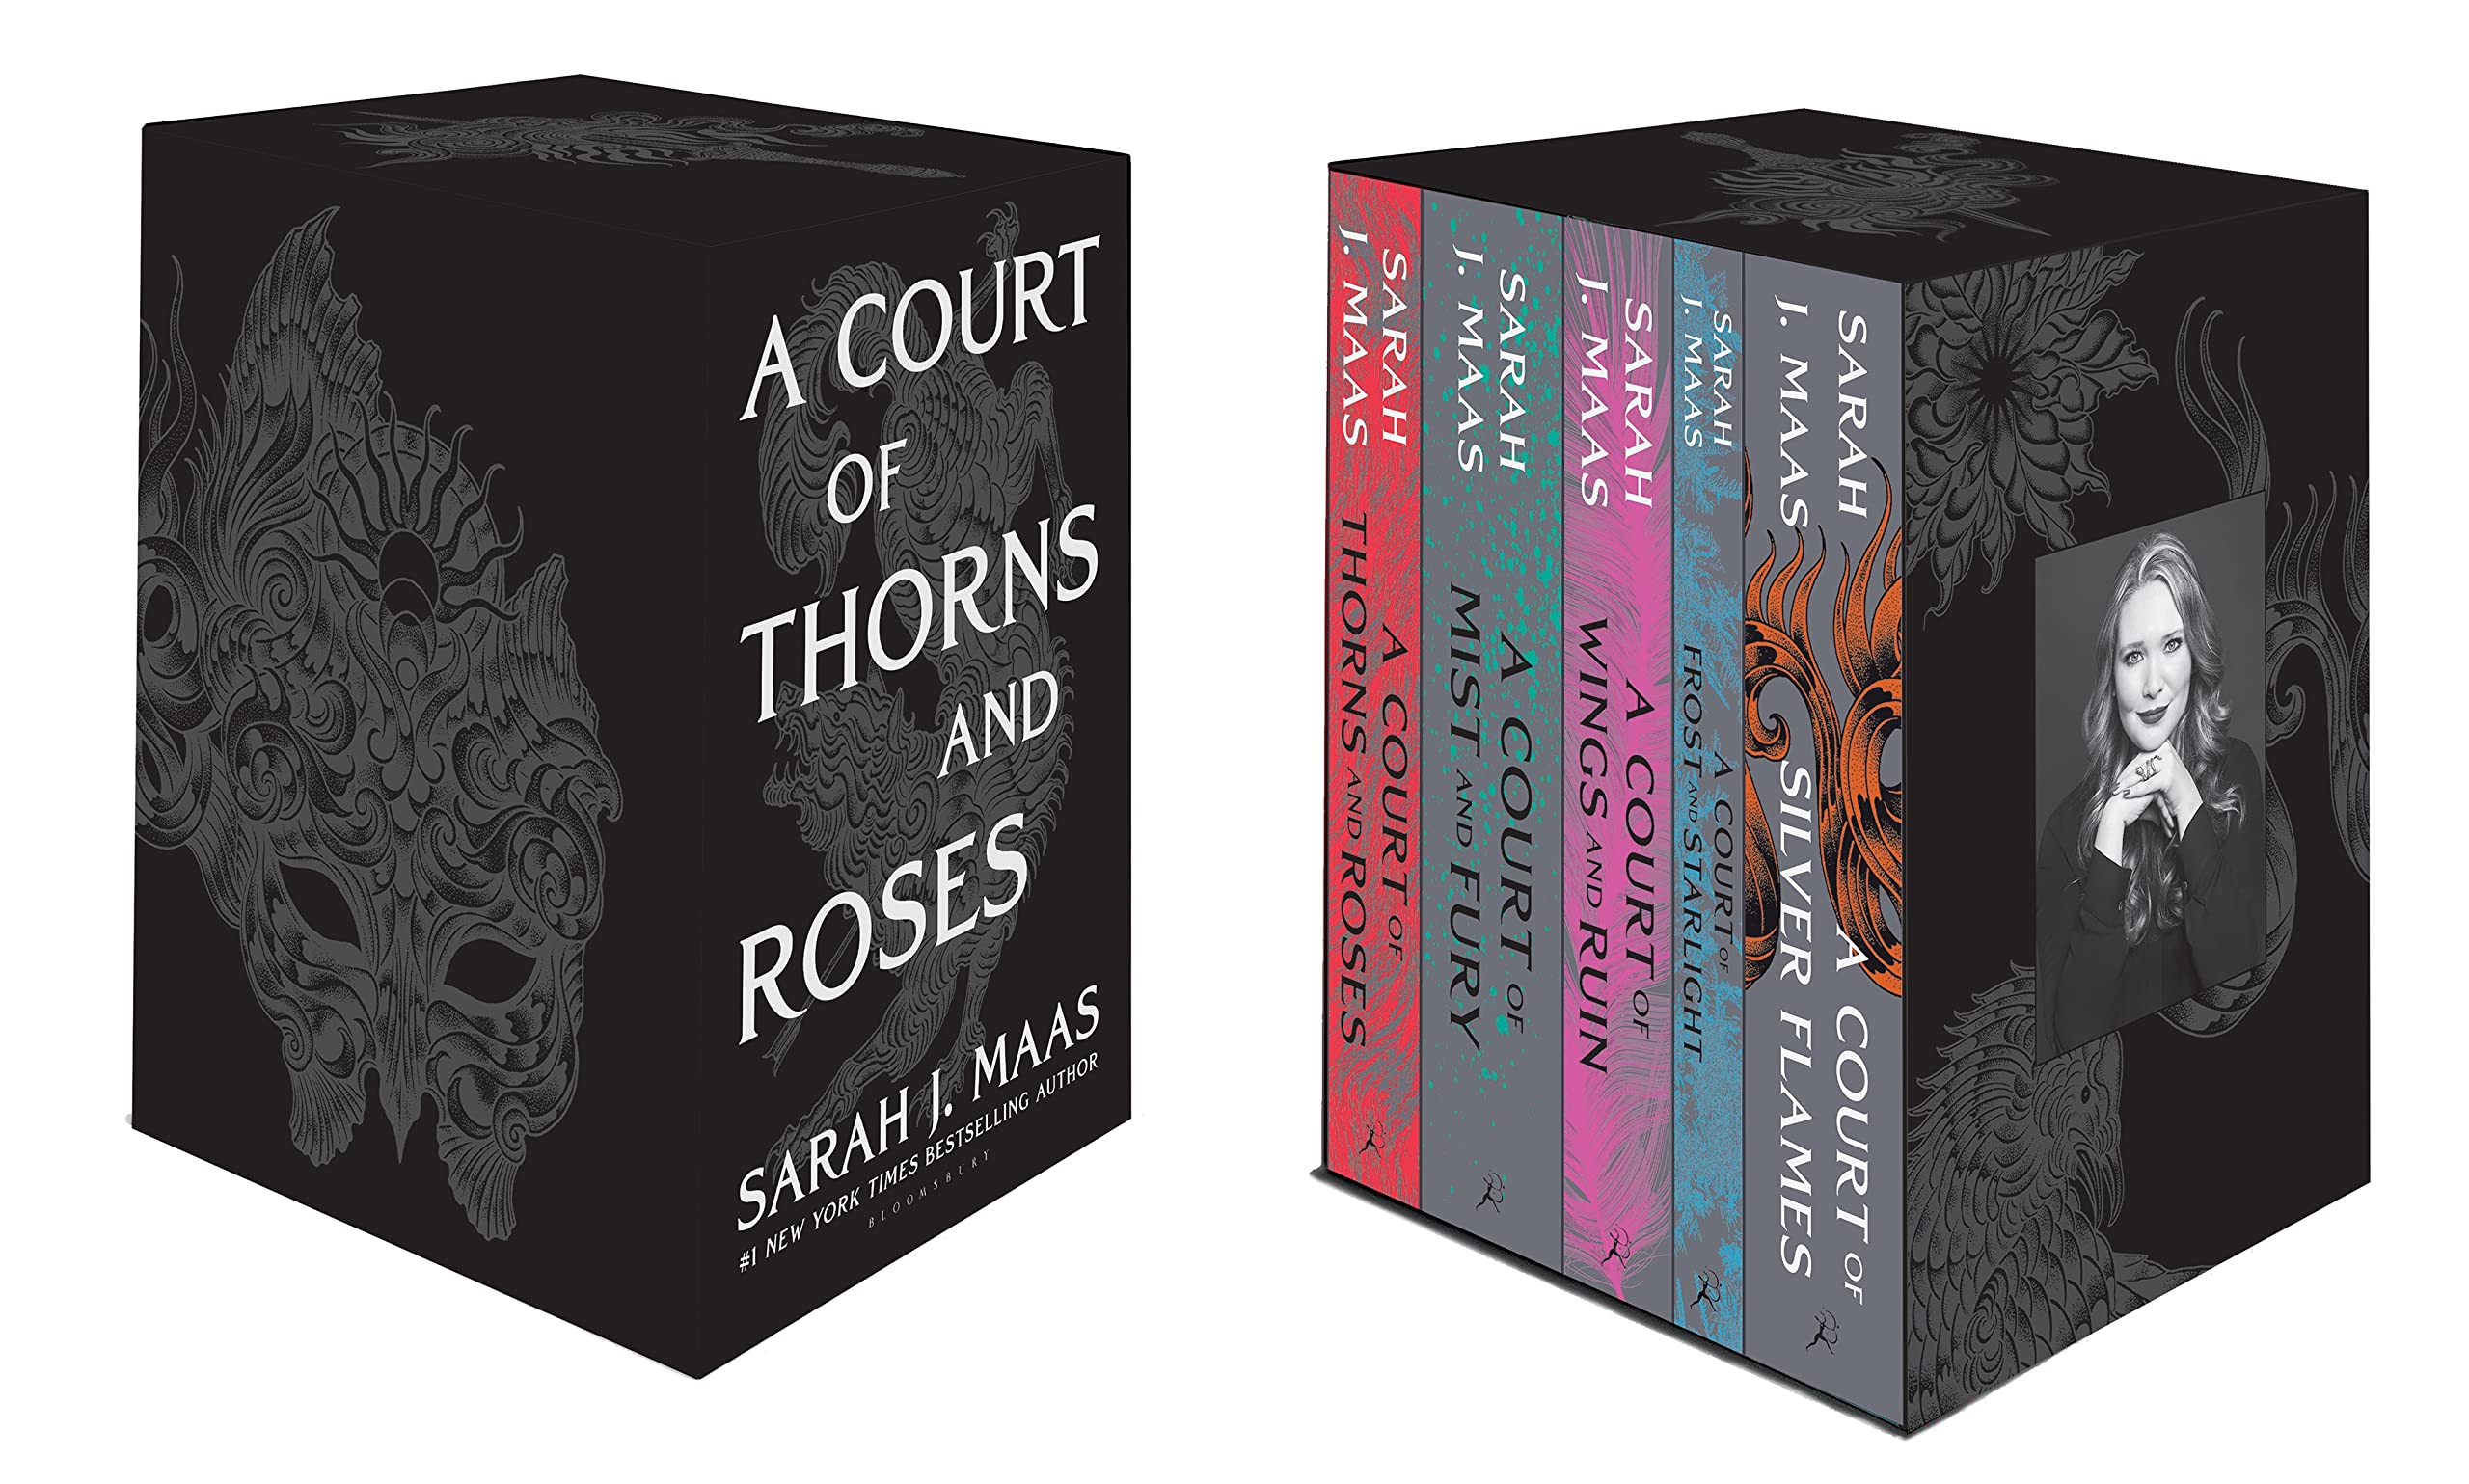 Set - A Court of Thorns and Roses